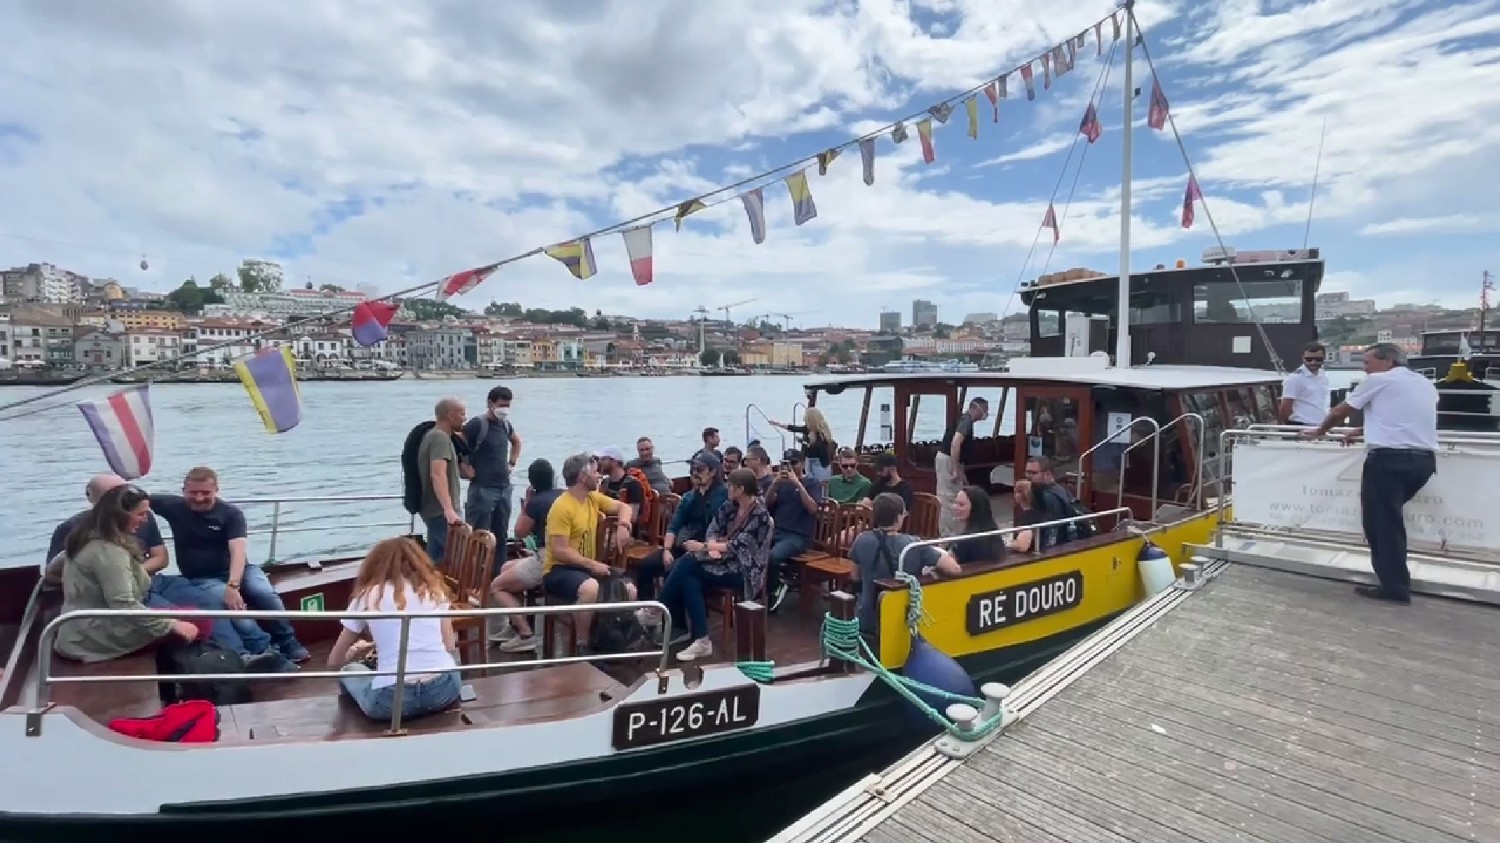 XWP Team enjoying a river boat cruise on team day in Porto, Portugal.